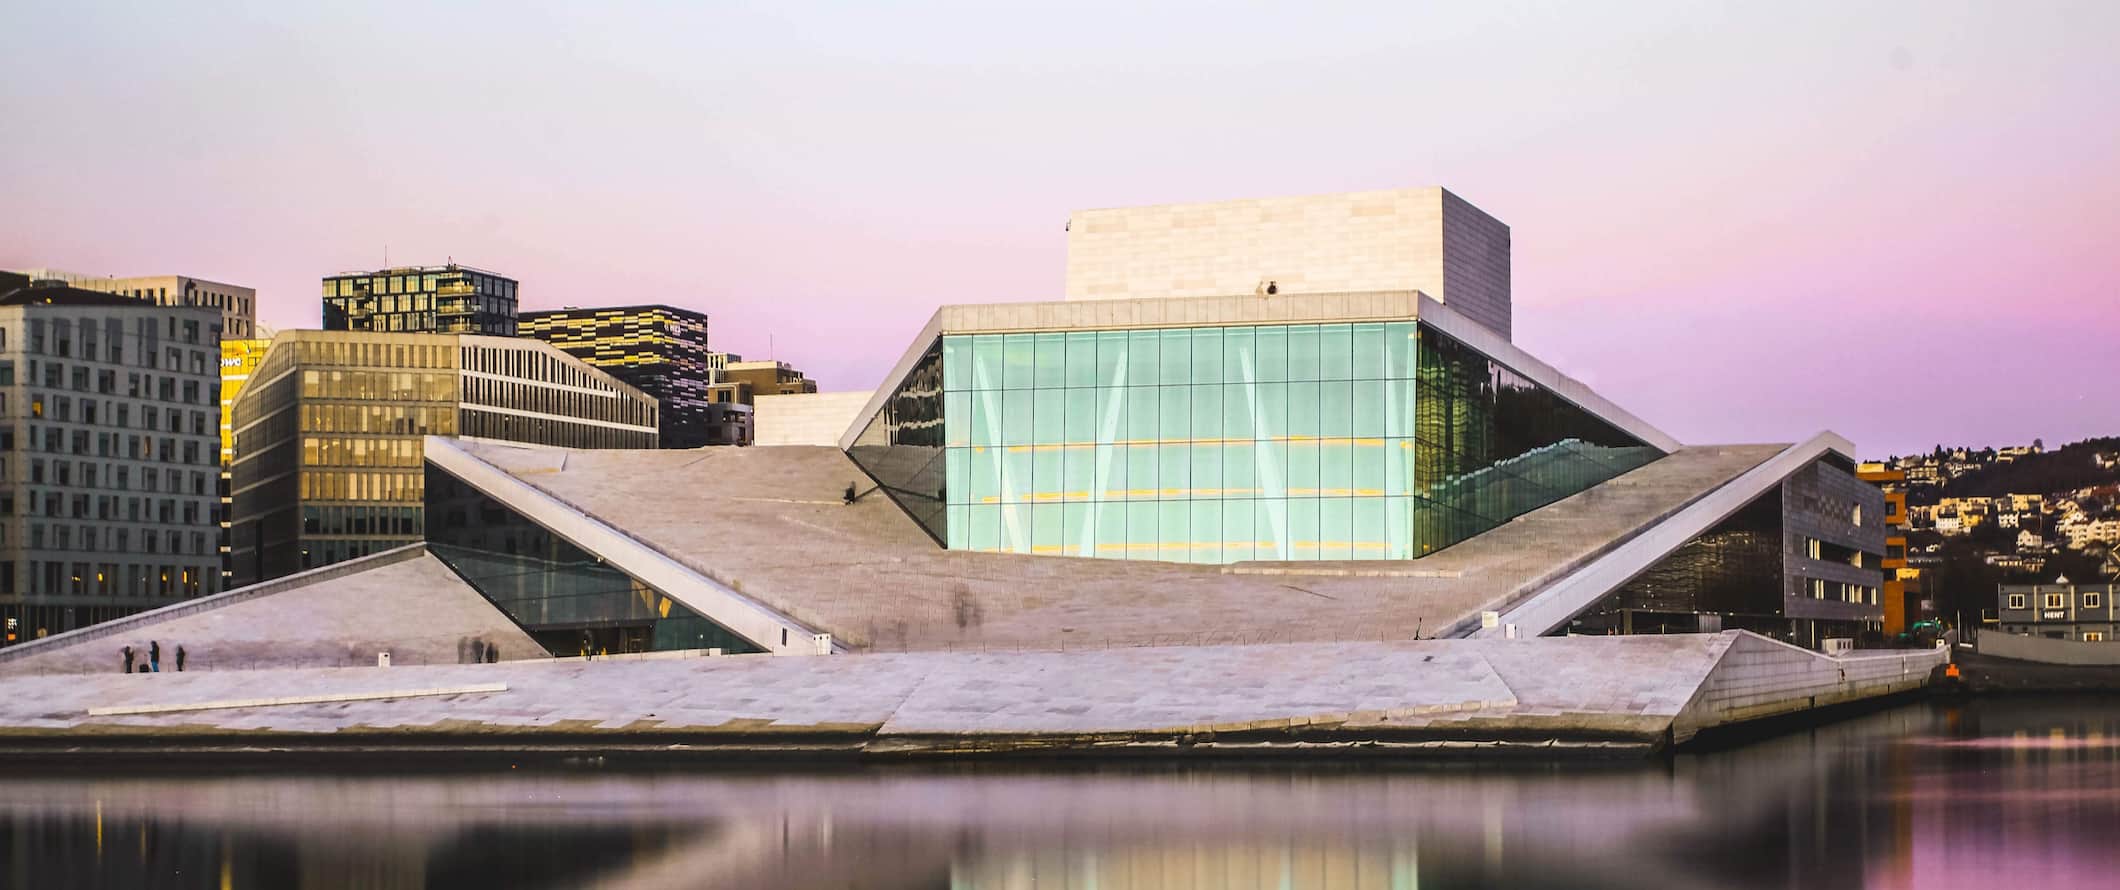 The iconic opera building on the shore of Oslo, Norway during a colorful sunset